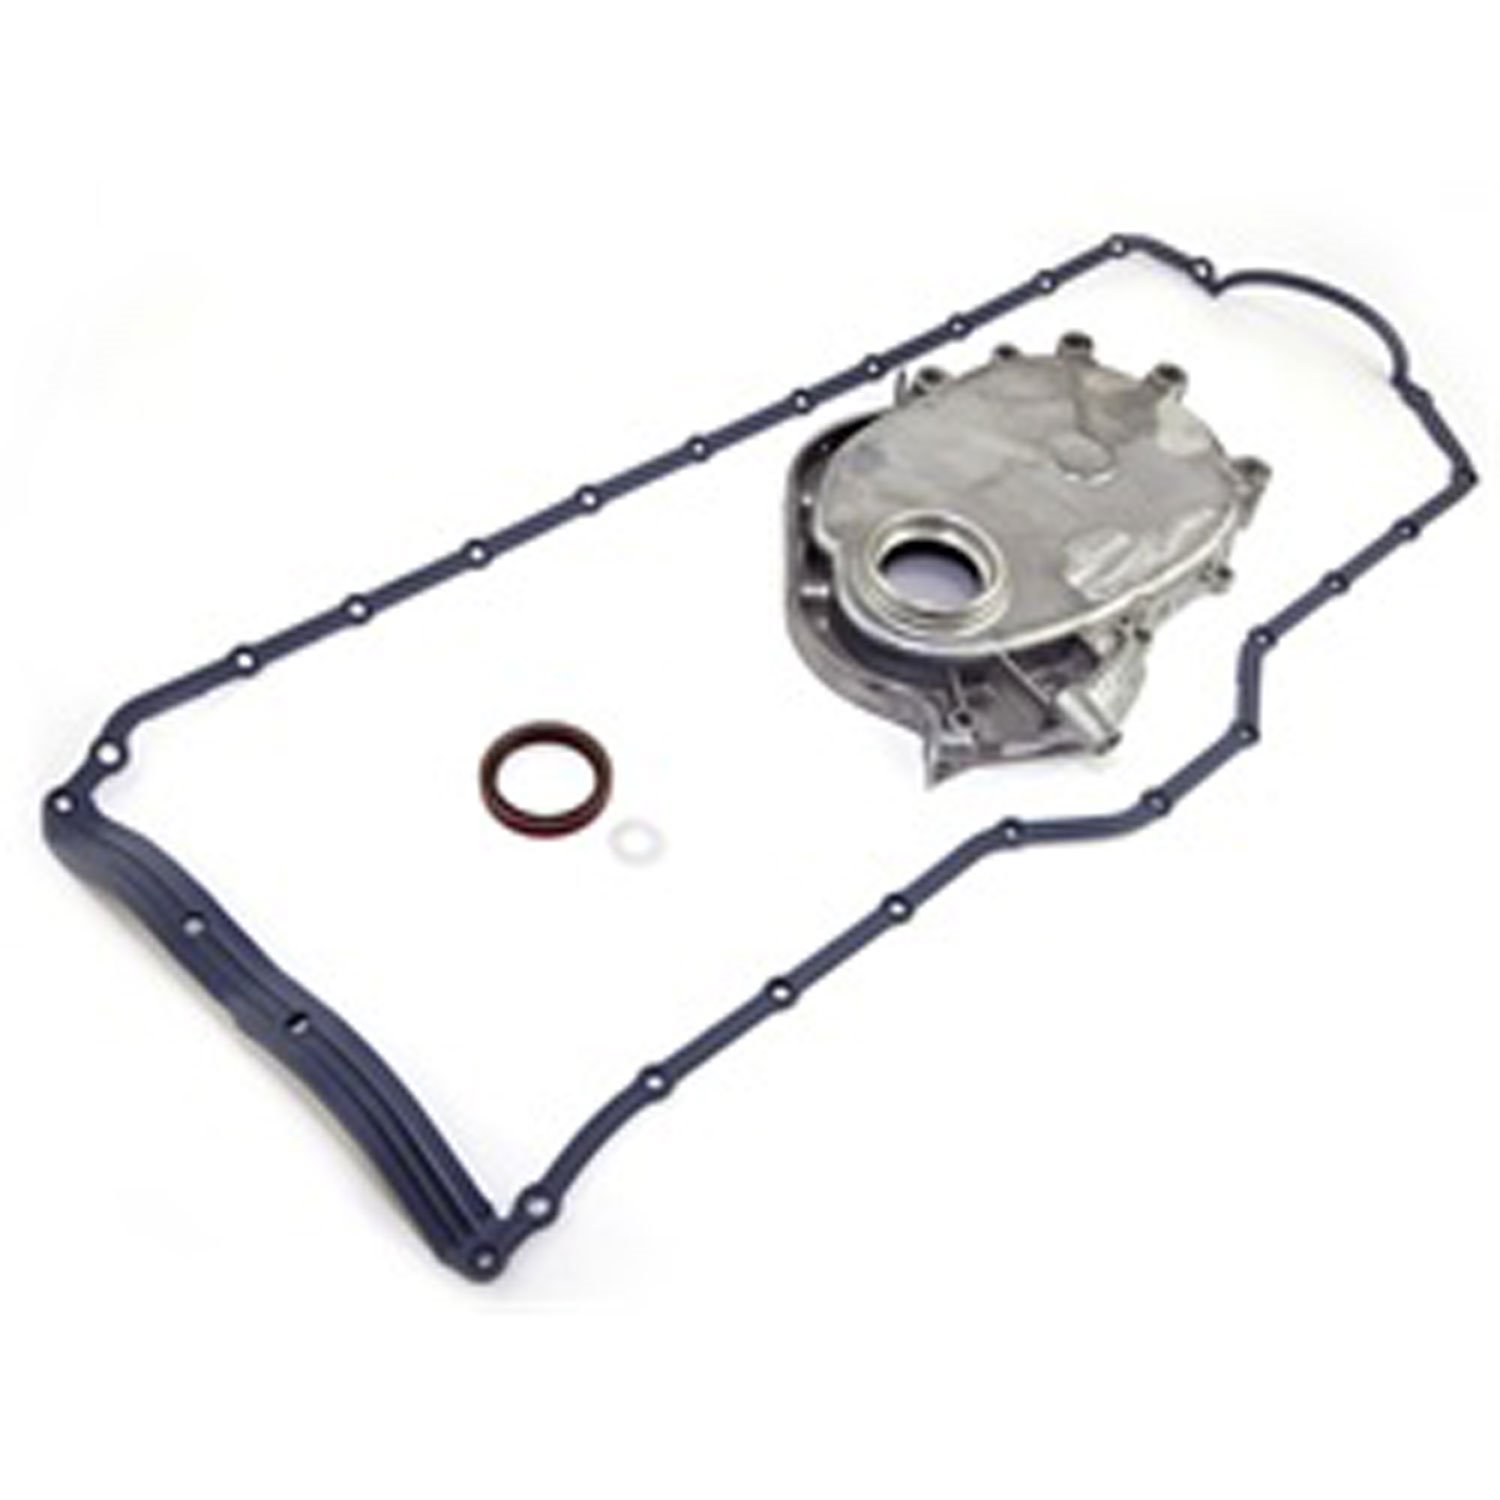 Replacement timing chain cover kit, Fits 72-90 Jeep models with 3.8 liter or 4.2 liter engines.